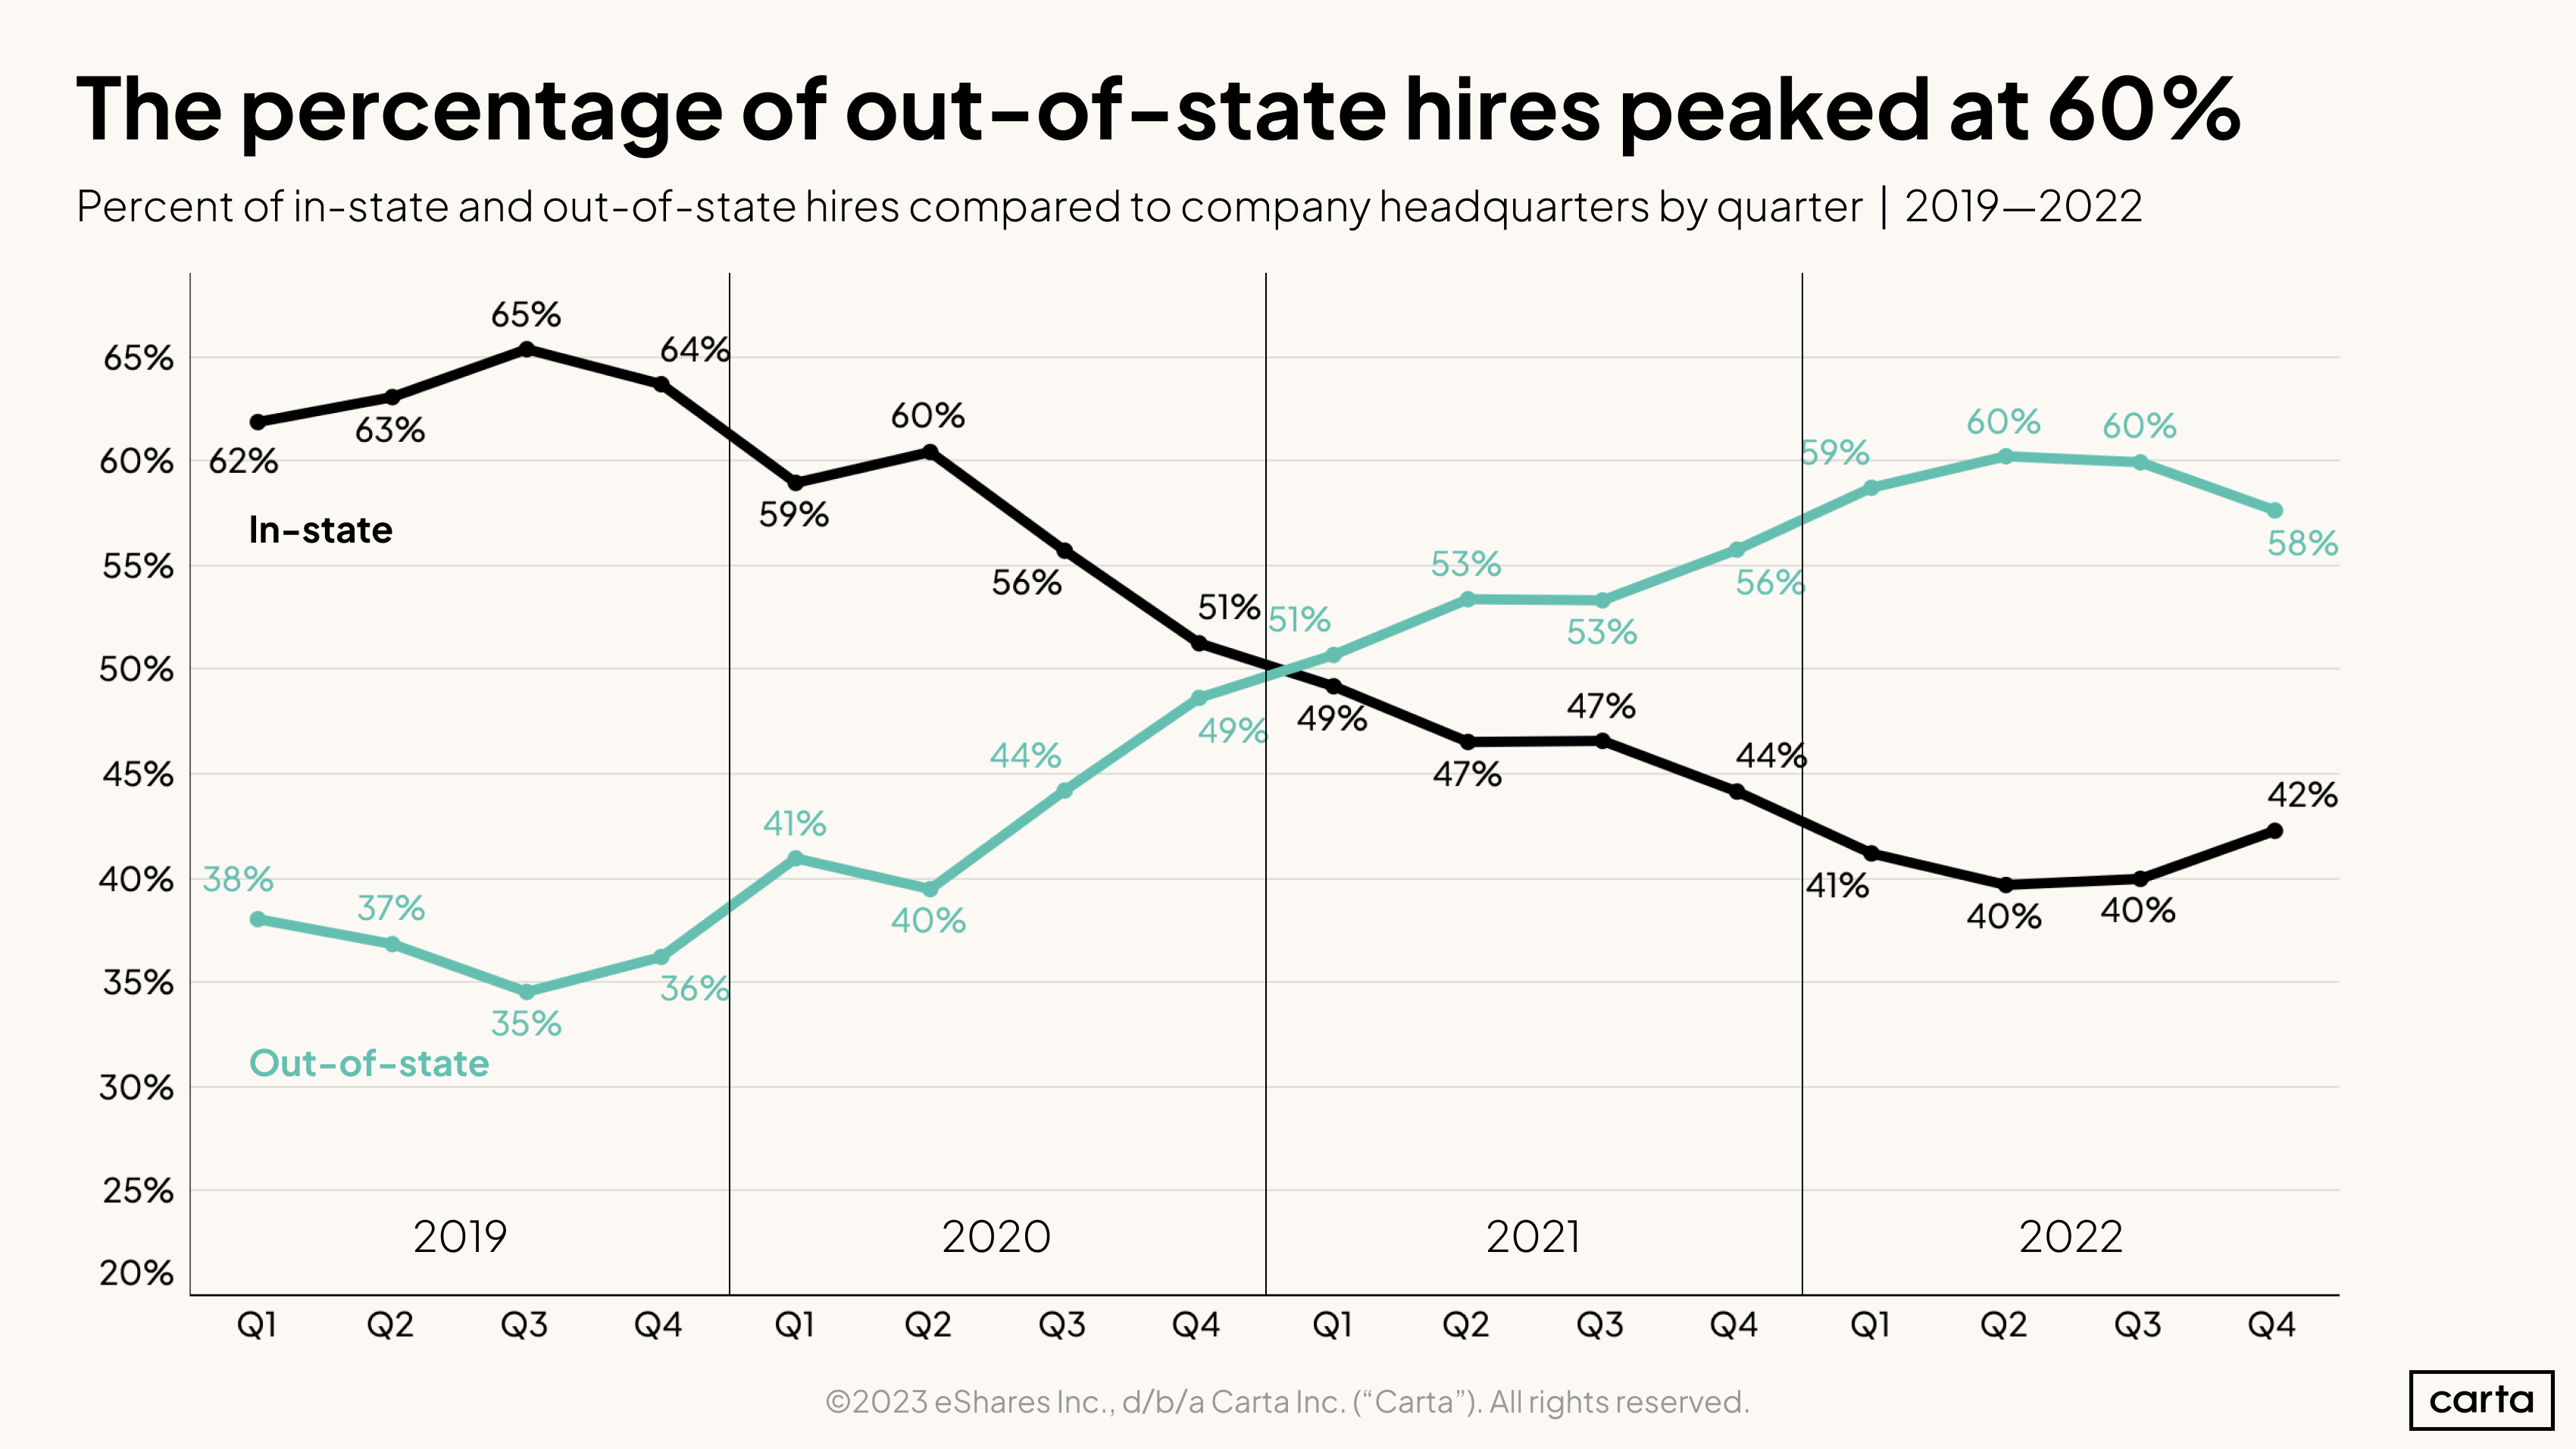 Percent of instate and out-of-state hires compared to company headquarters by quarter, 2019-2022